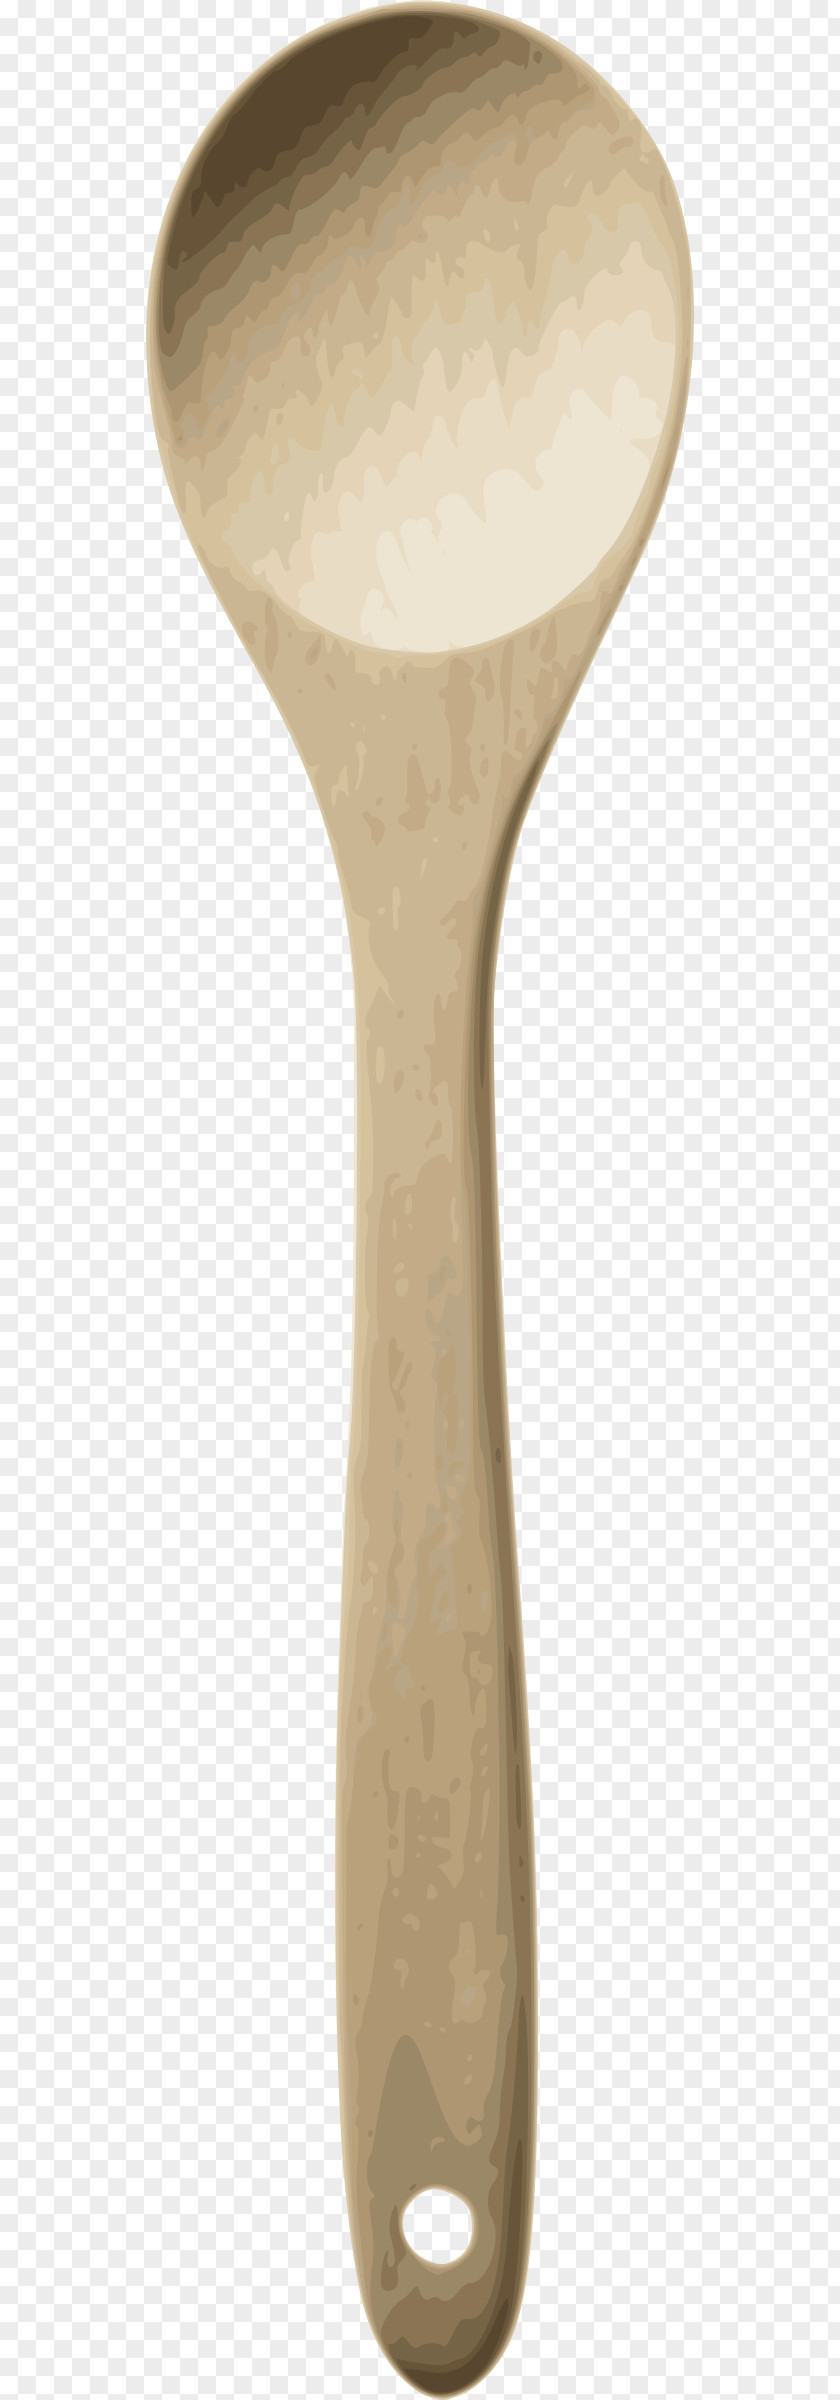 Wooden Spoon Cliparts PNG